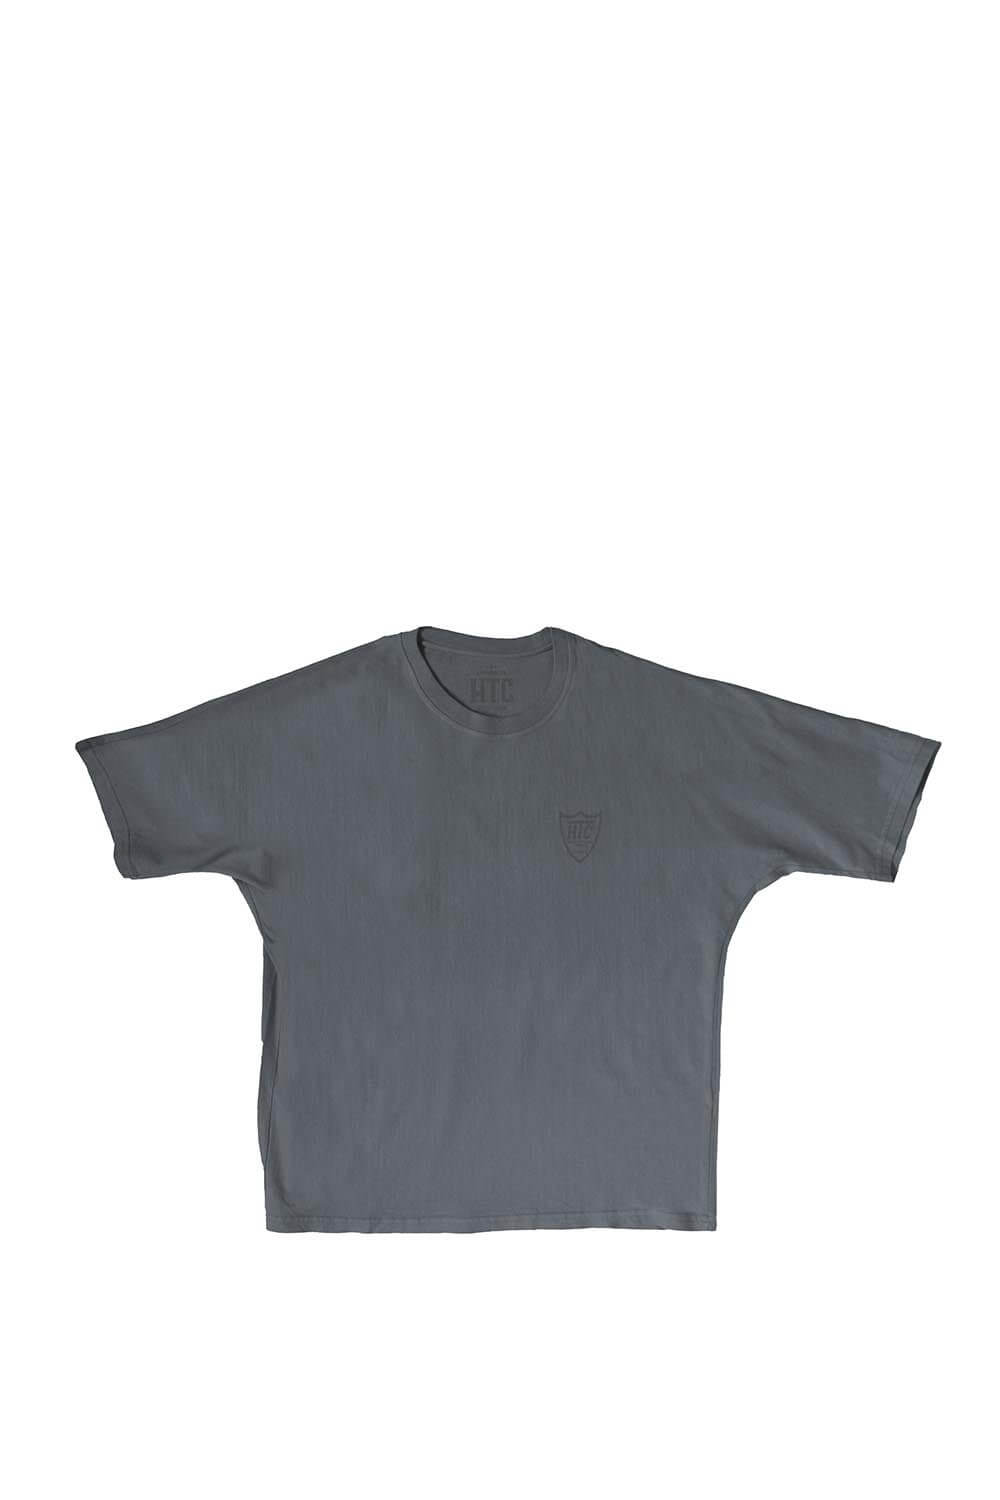 HTC LIL STORM T-SHIRT t-shirts with a Japanese fit, they have no shoulder seam and the fabric has been specially developed. In addition to the comfortable feel, this fabric, called twisted, allows for greater resilience. HTC LOS ANGELES